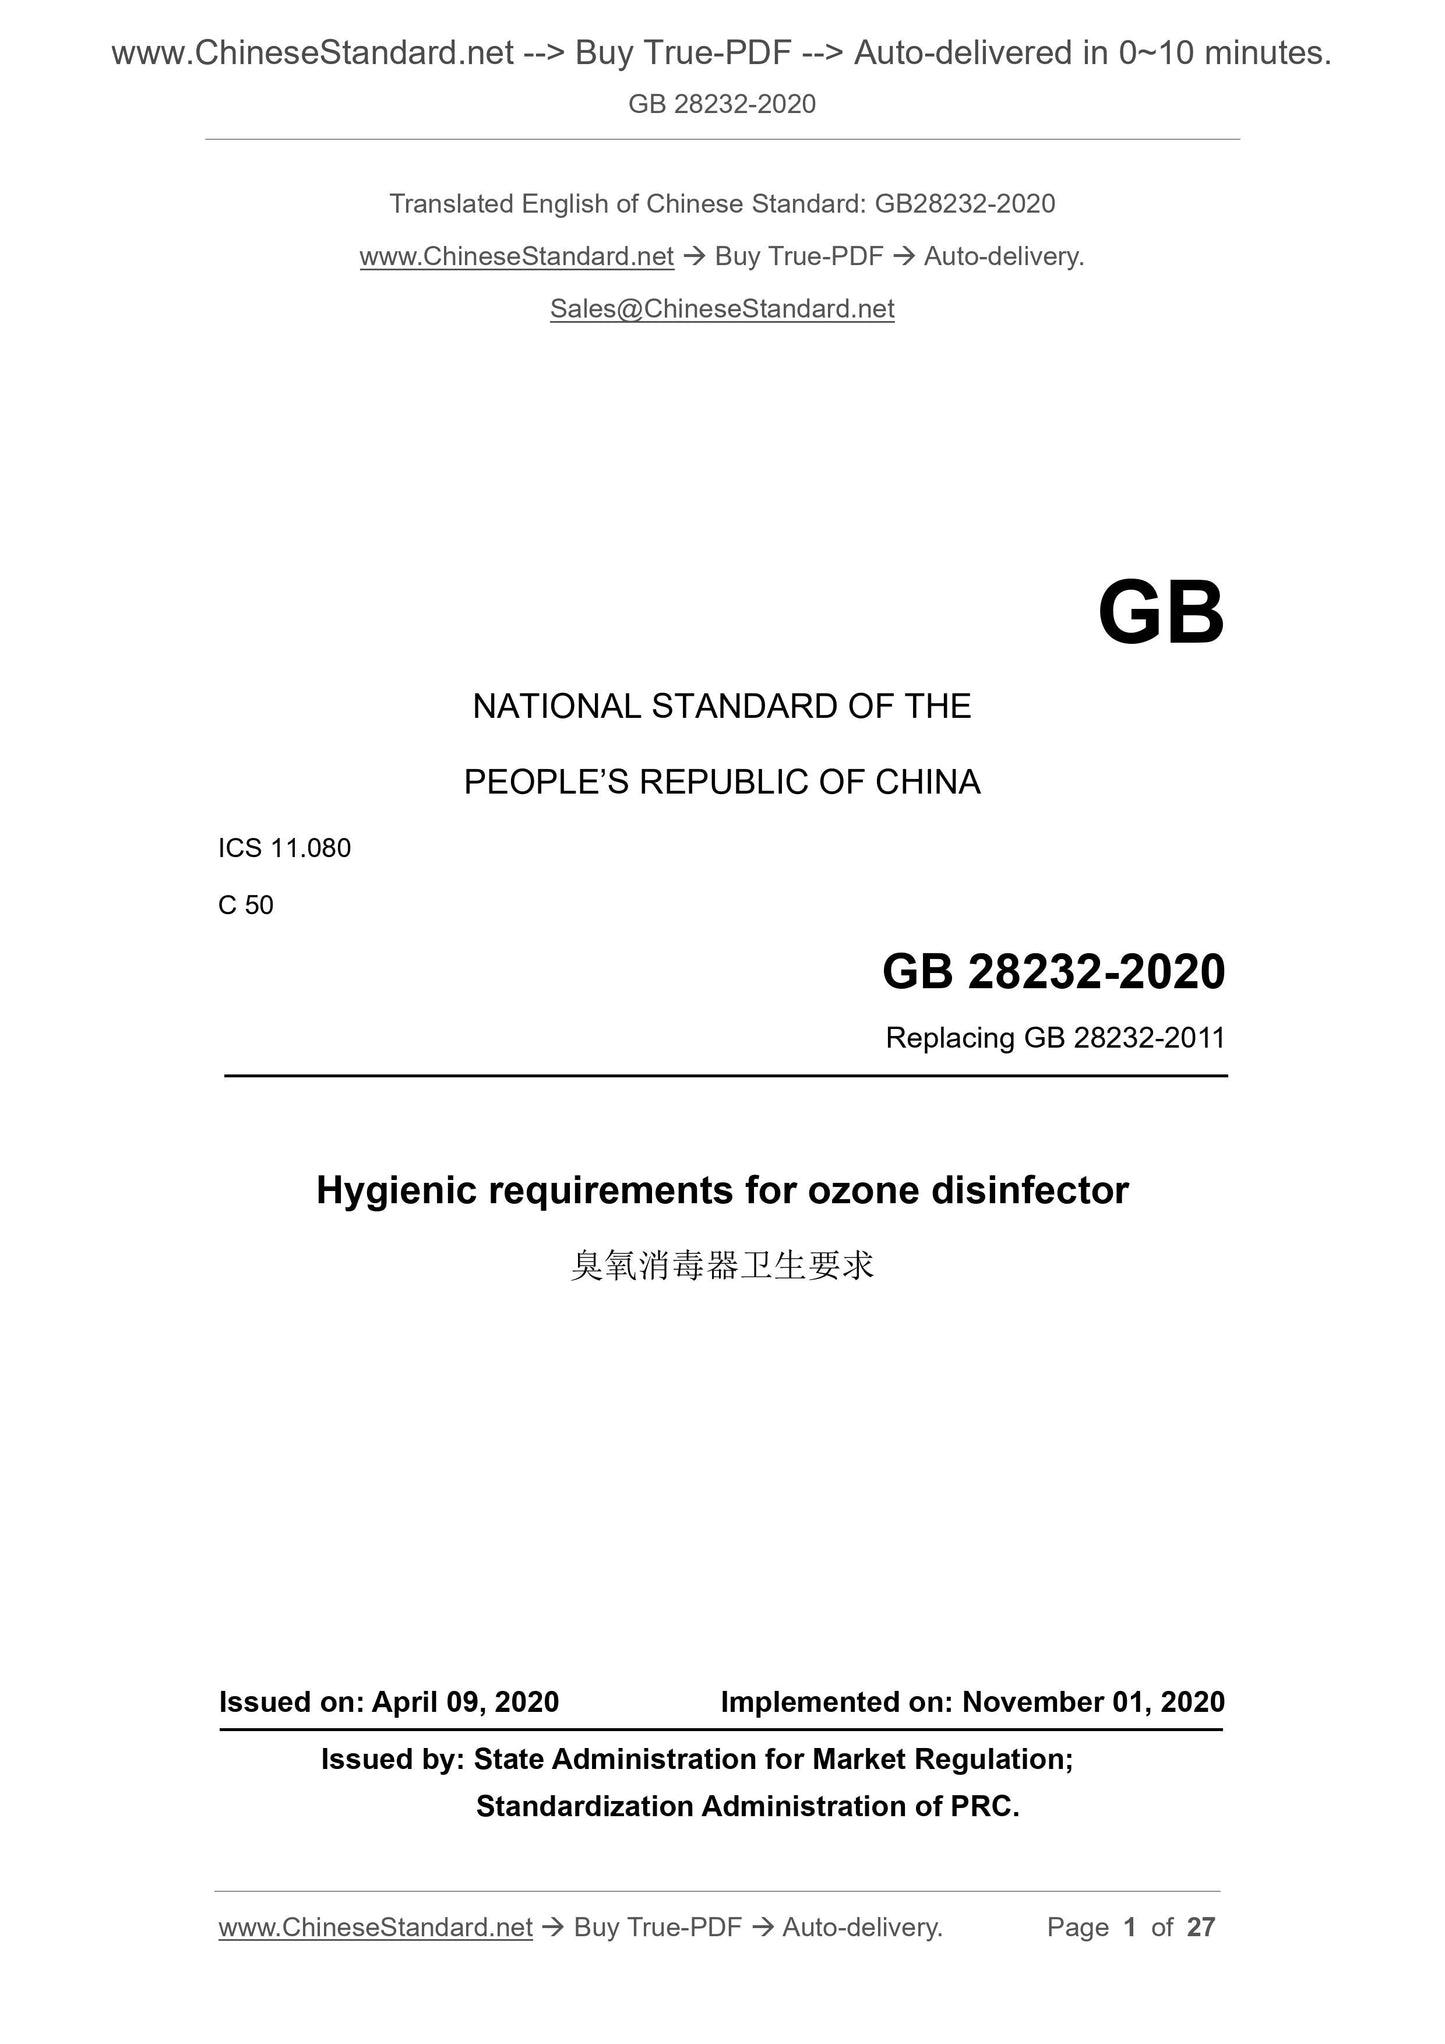 GB 28232-2020 Page 1